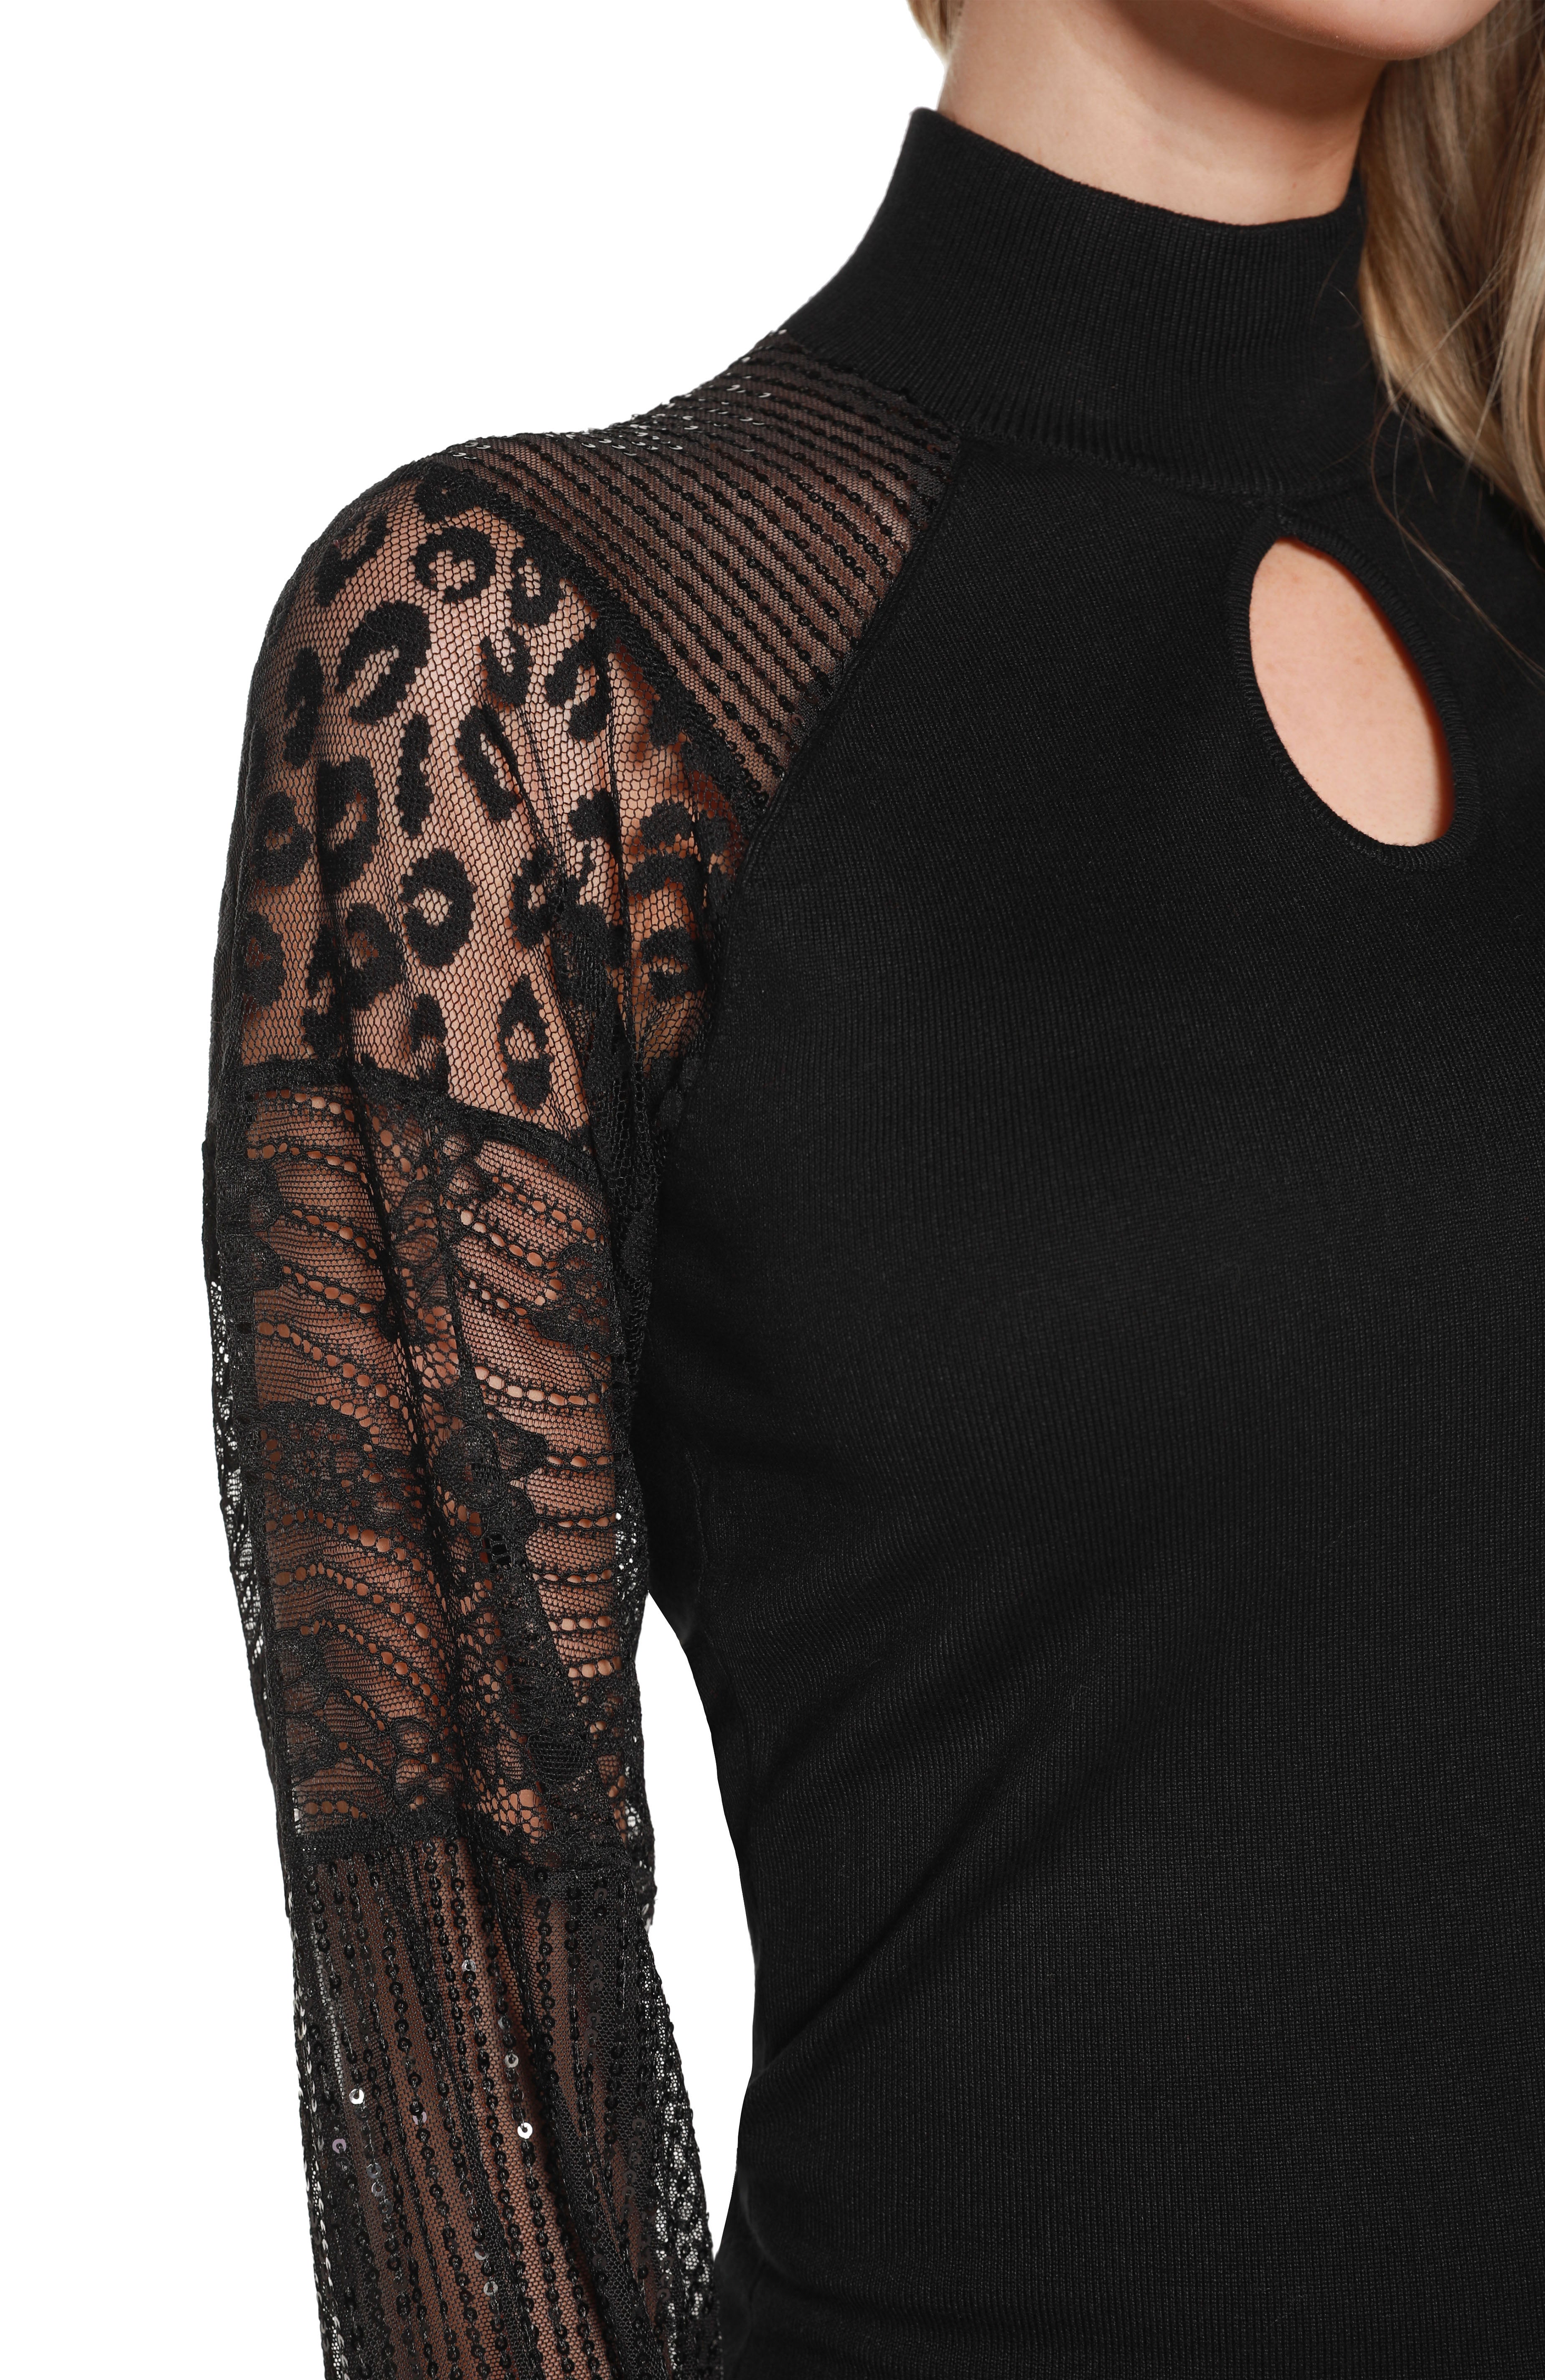 Women’s Long Sleeve Black Sexy Sweater with Modern Lace and Sequin Sleeves